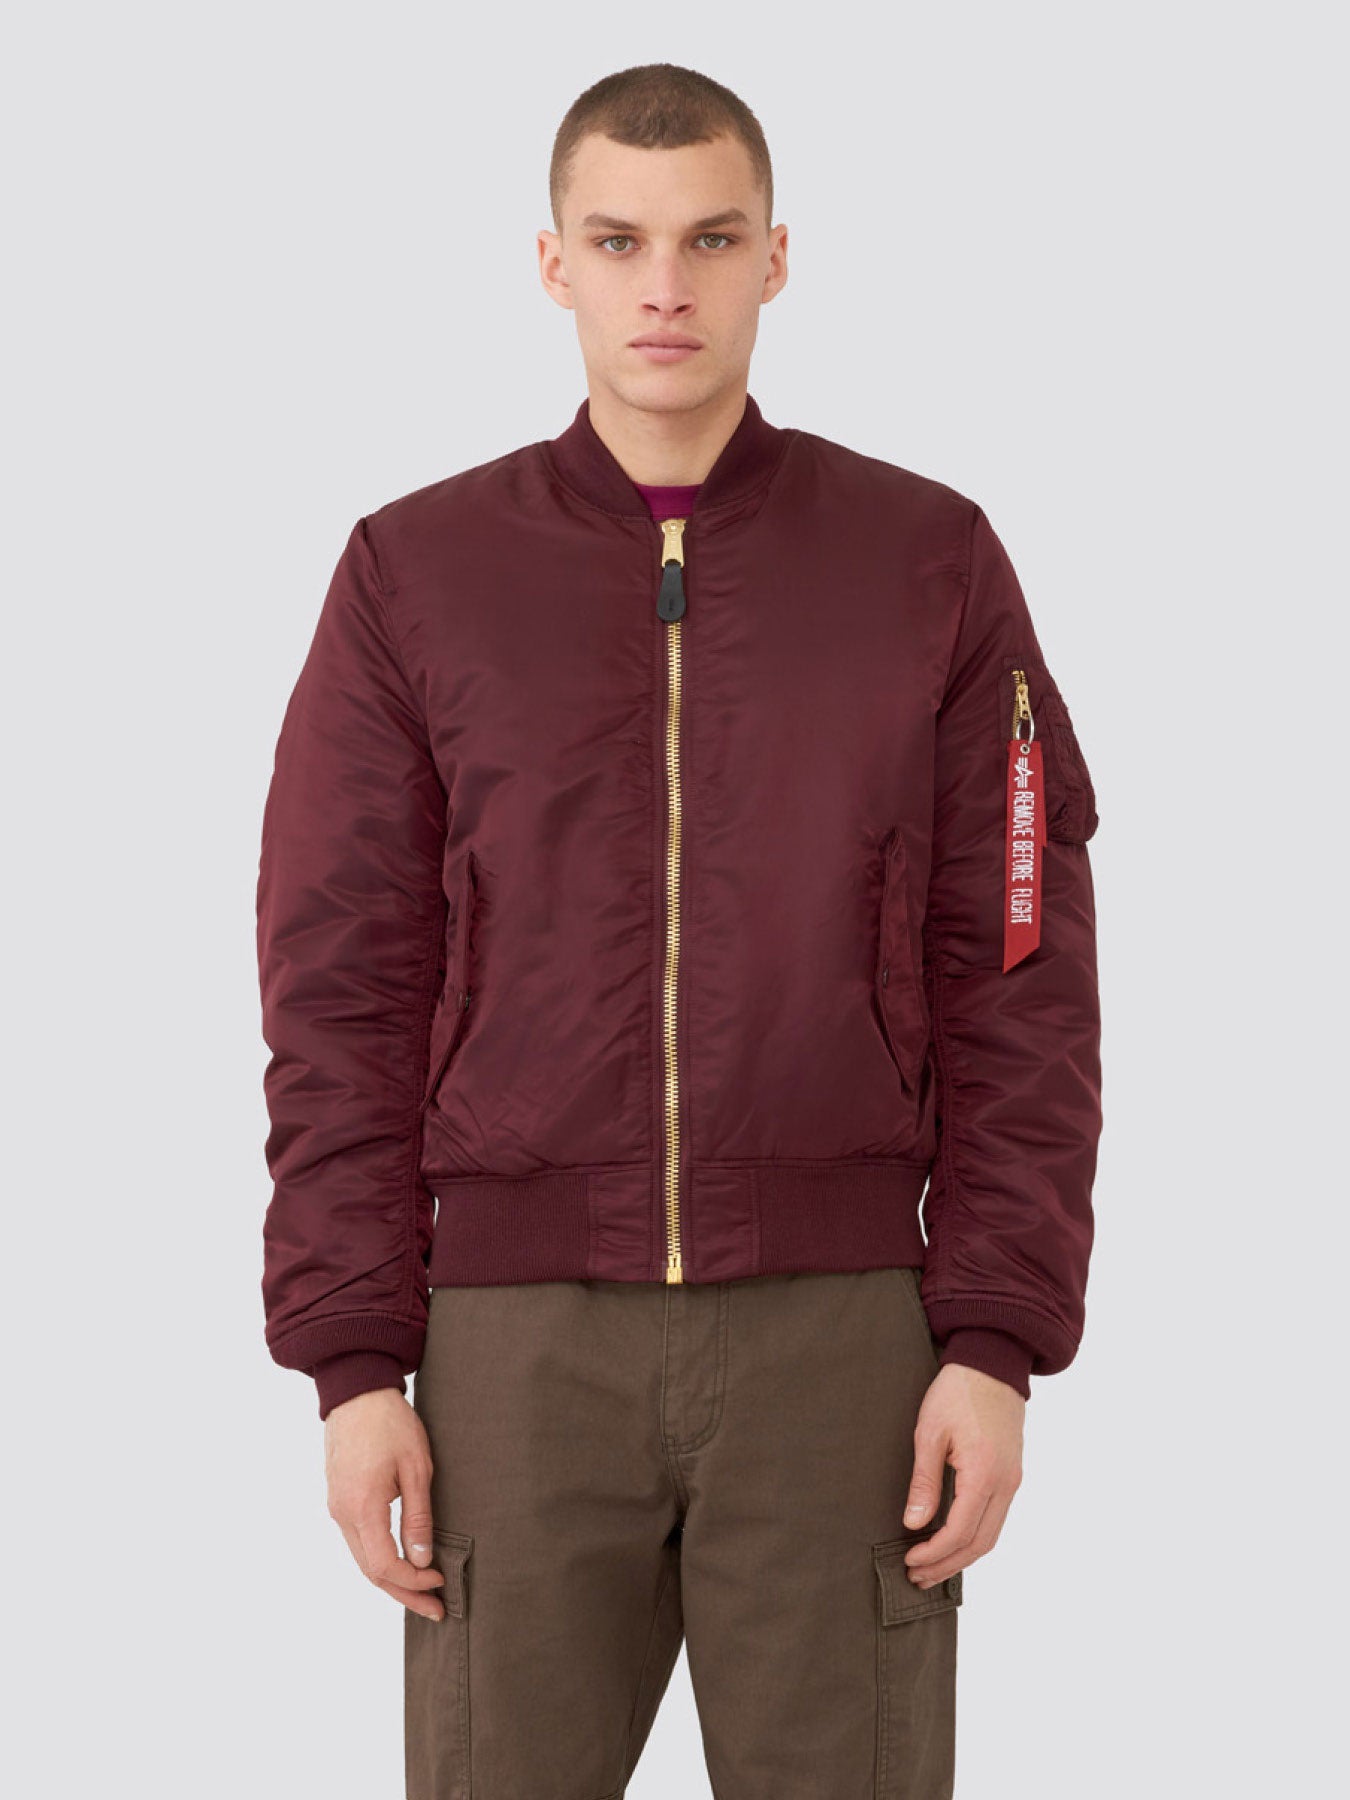 ALPHA Posers – Hollywood Jacket Bomber INDUSTRIES